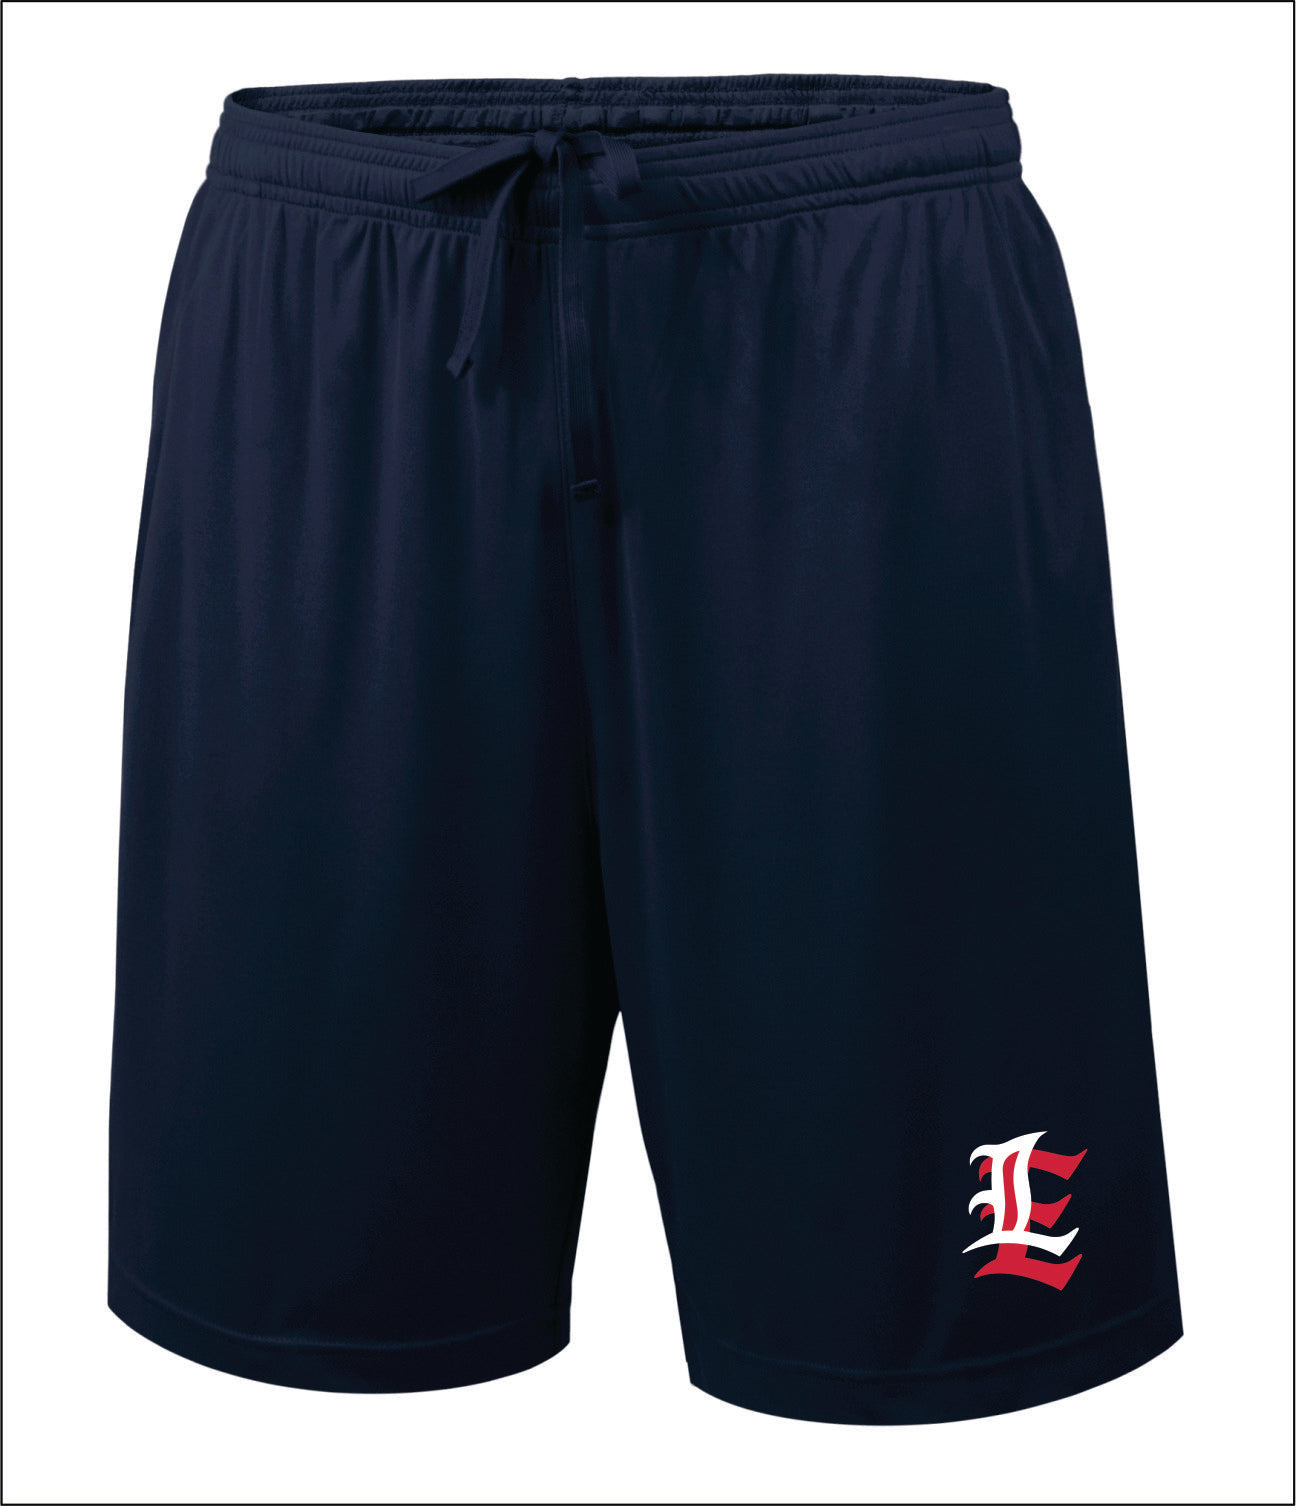 LAMAR EMBROIDERED MESH SHORTS - EMBROIDERED LOGO